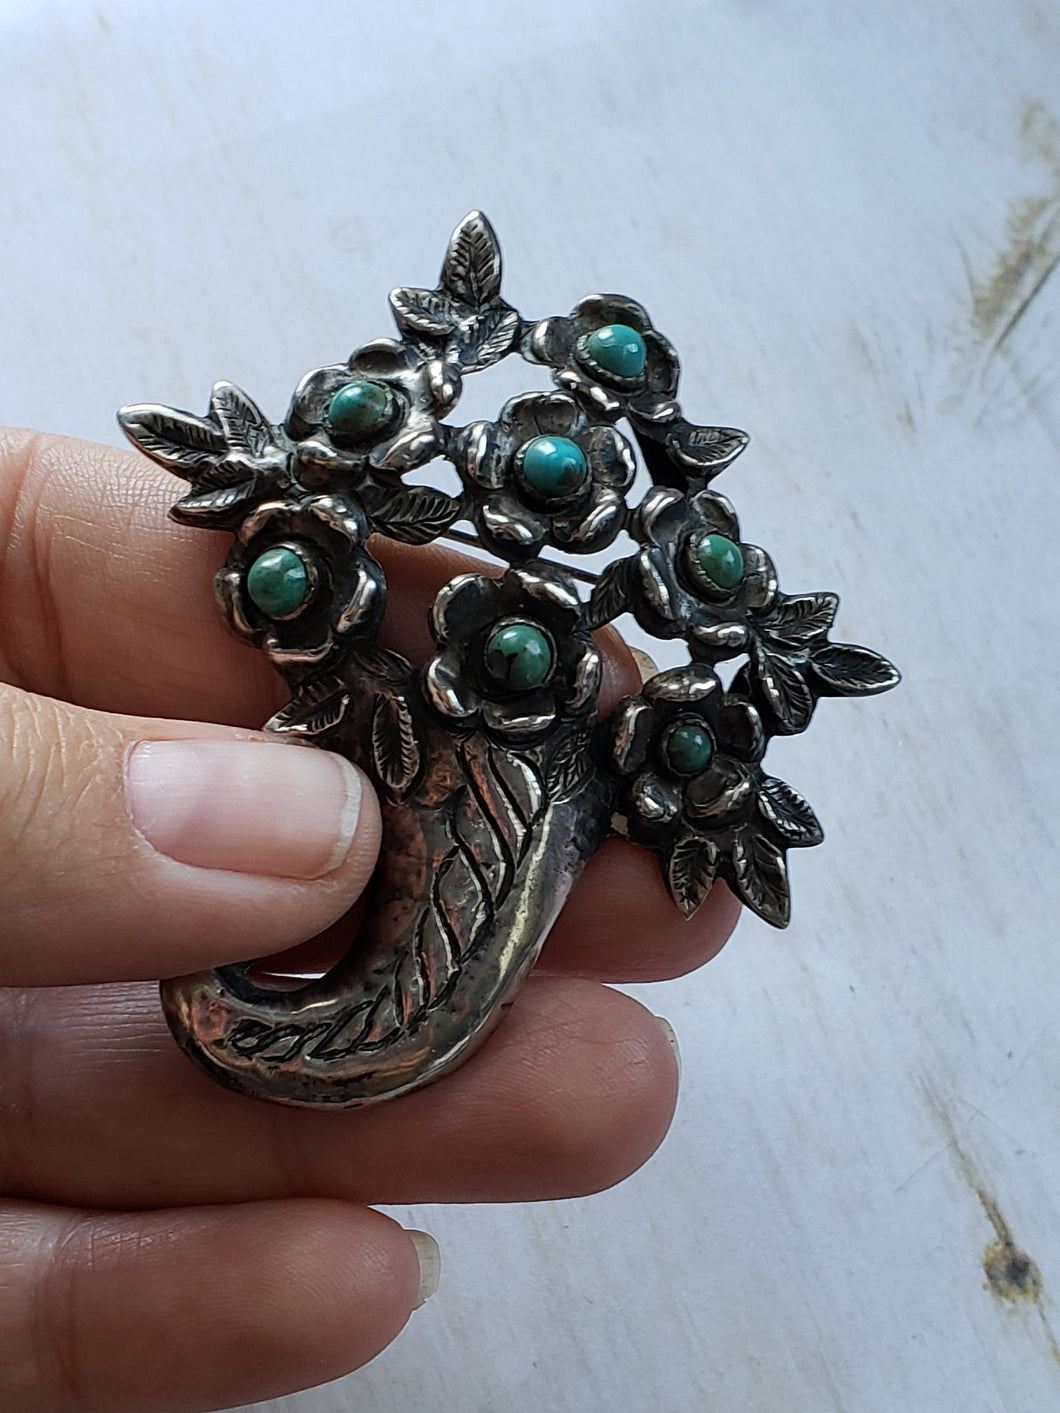 Estate Mexican Silver and Turquoise Brooch, 1930s, 1940s, Estate Silver, Antique Mexican Silver, Flowers, Horn of Plenty, Large Silver Pin